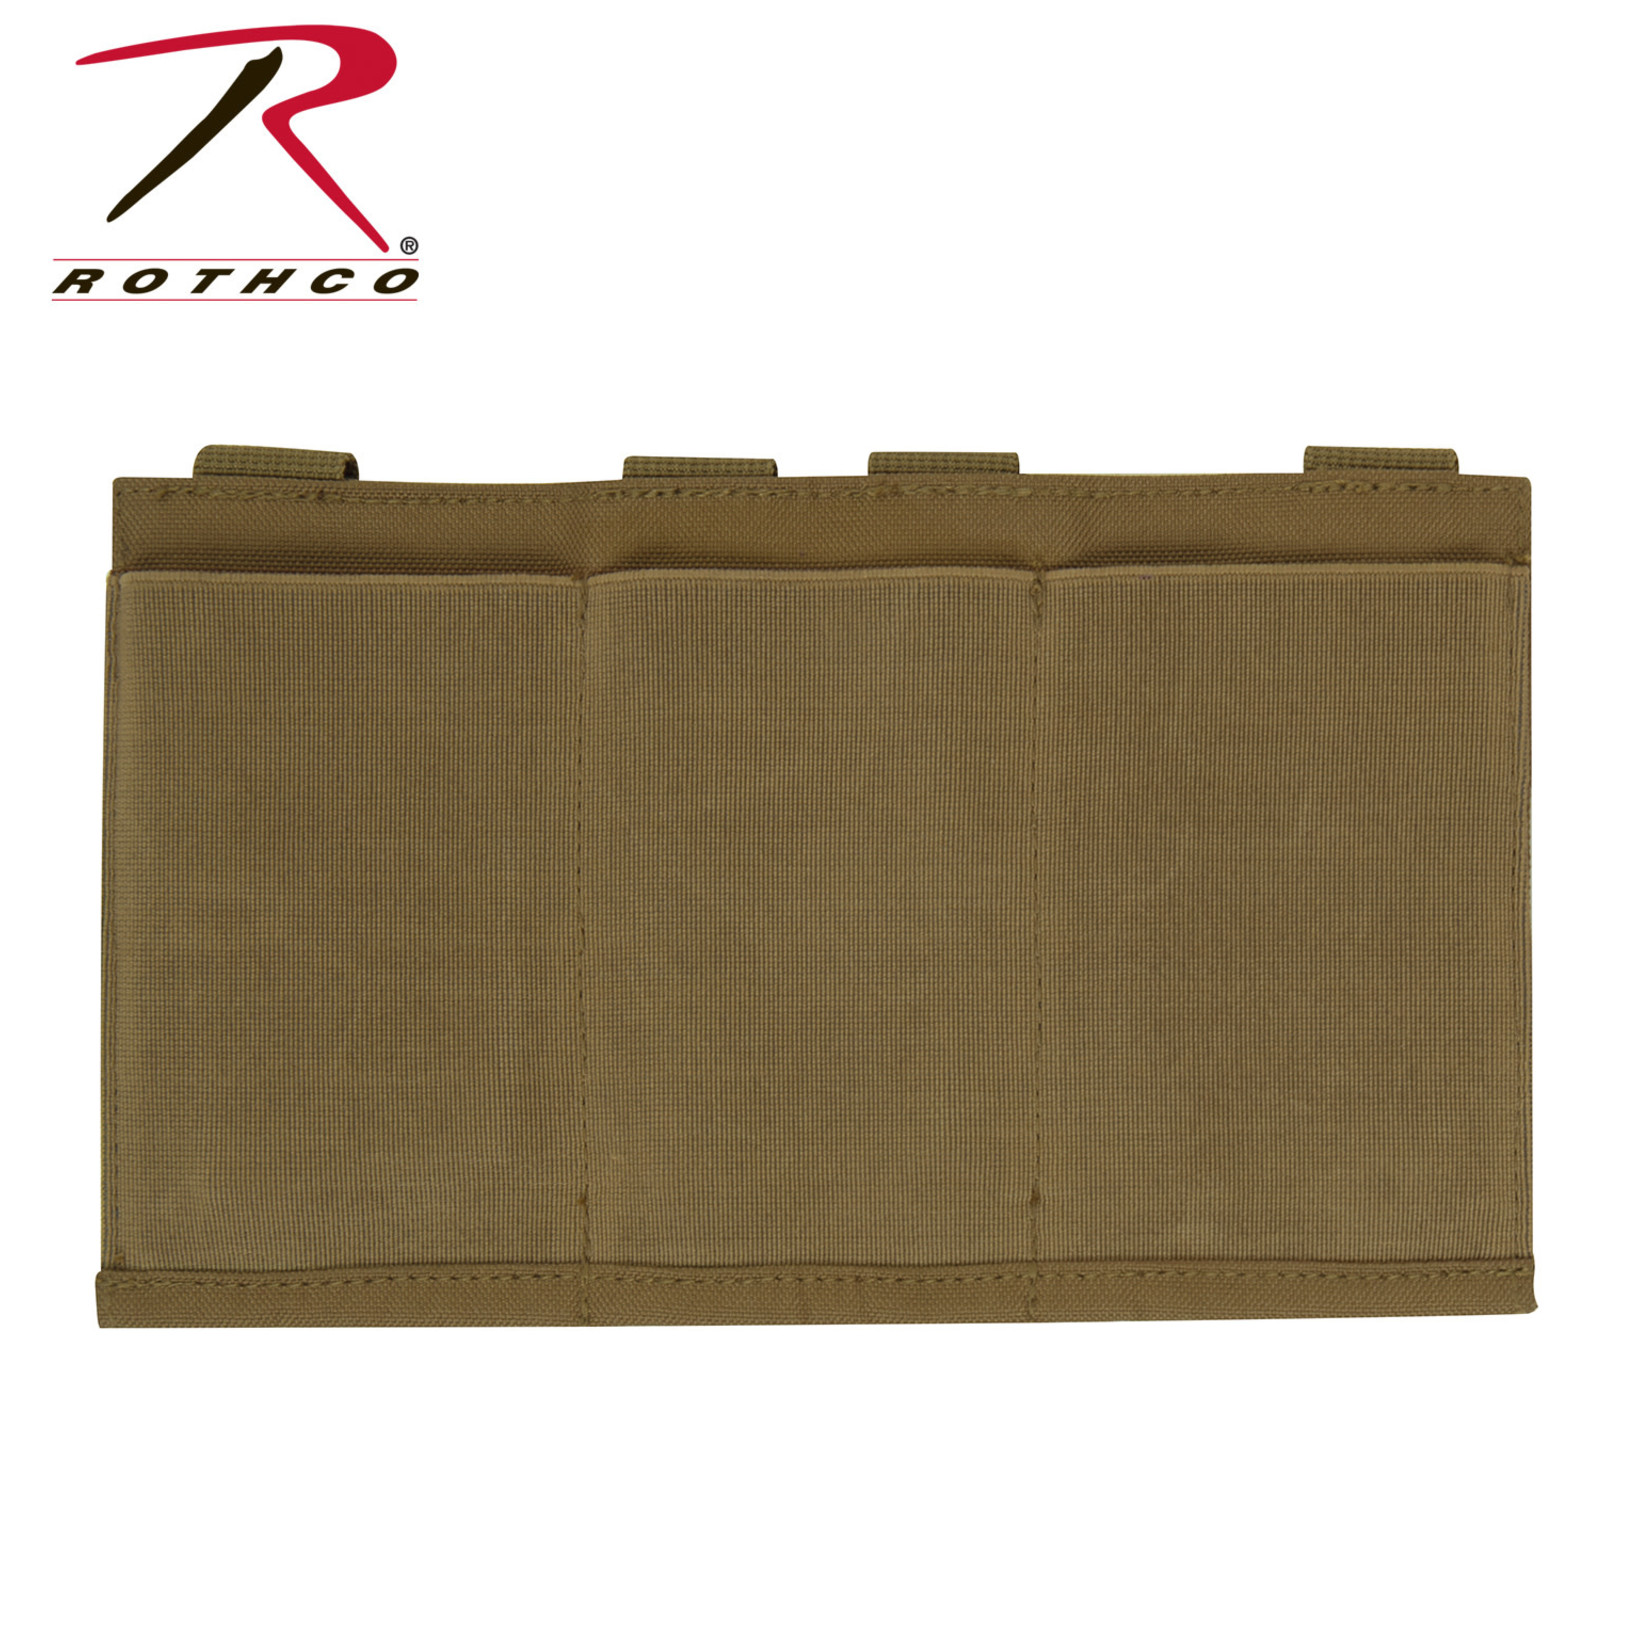 Rothco Rothco Lay Flat MOLLE Rifle 3 Magazine Pouch -